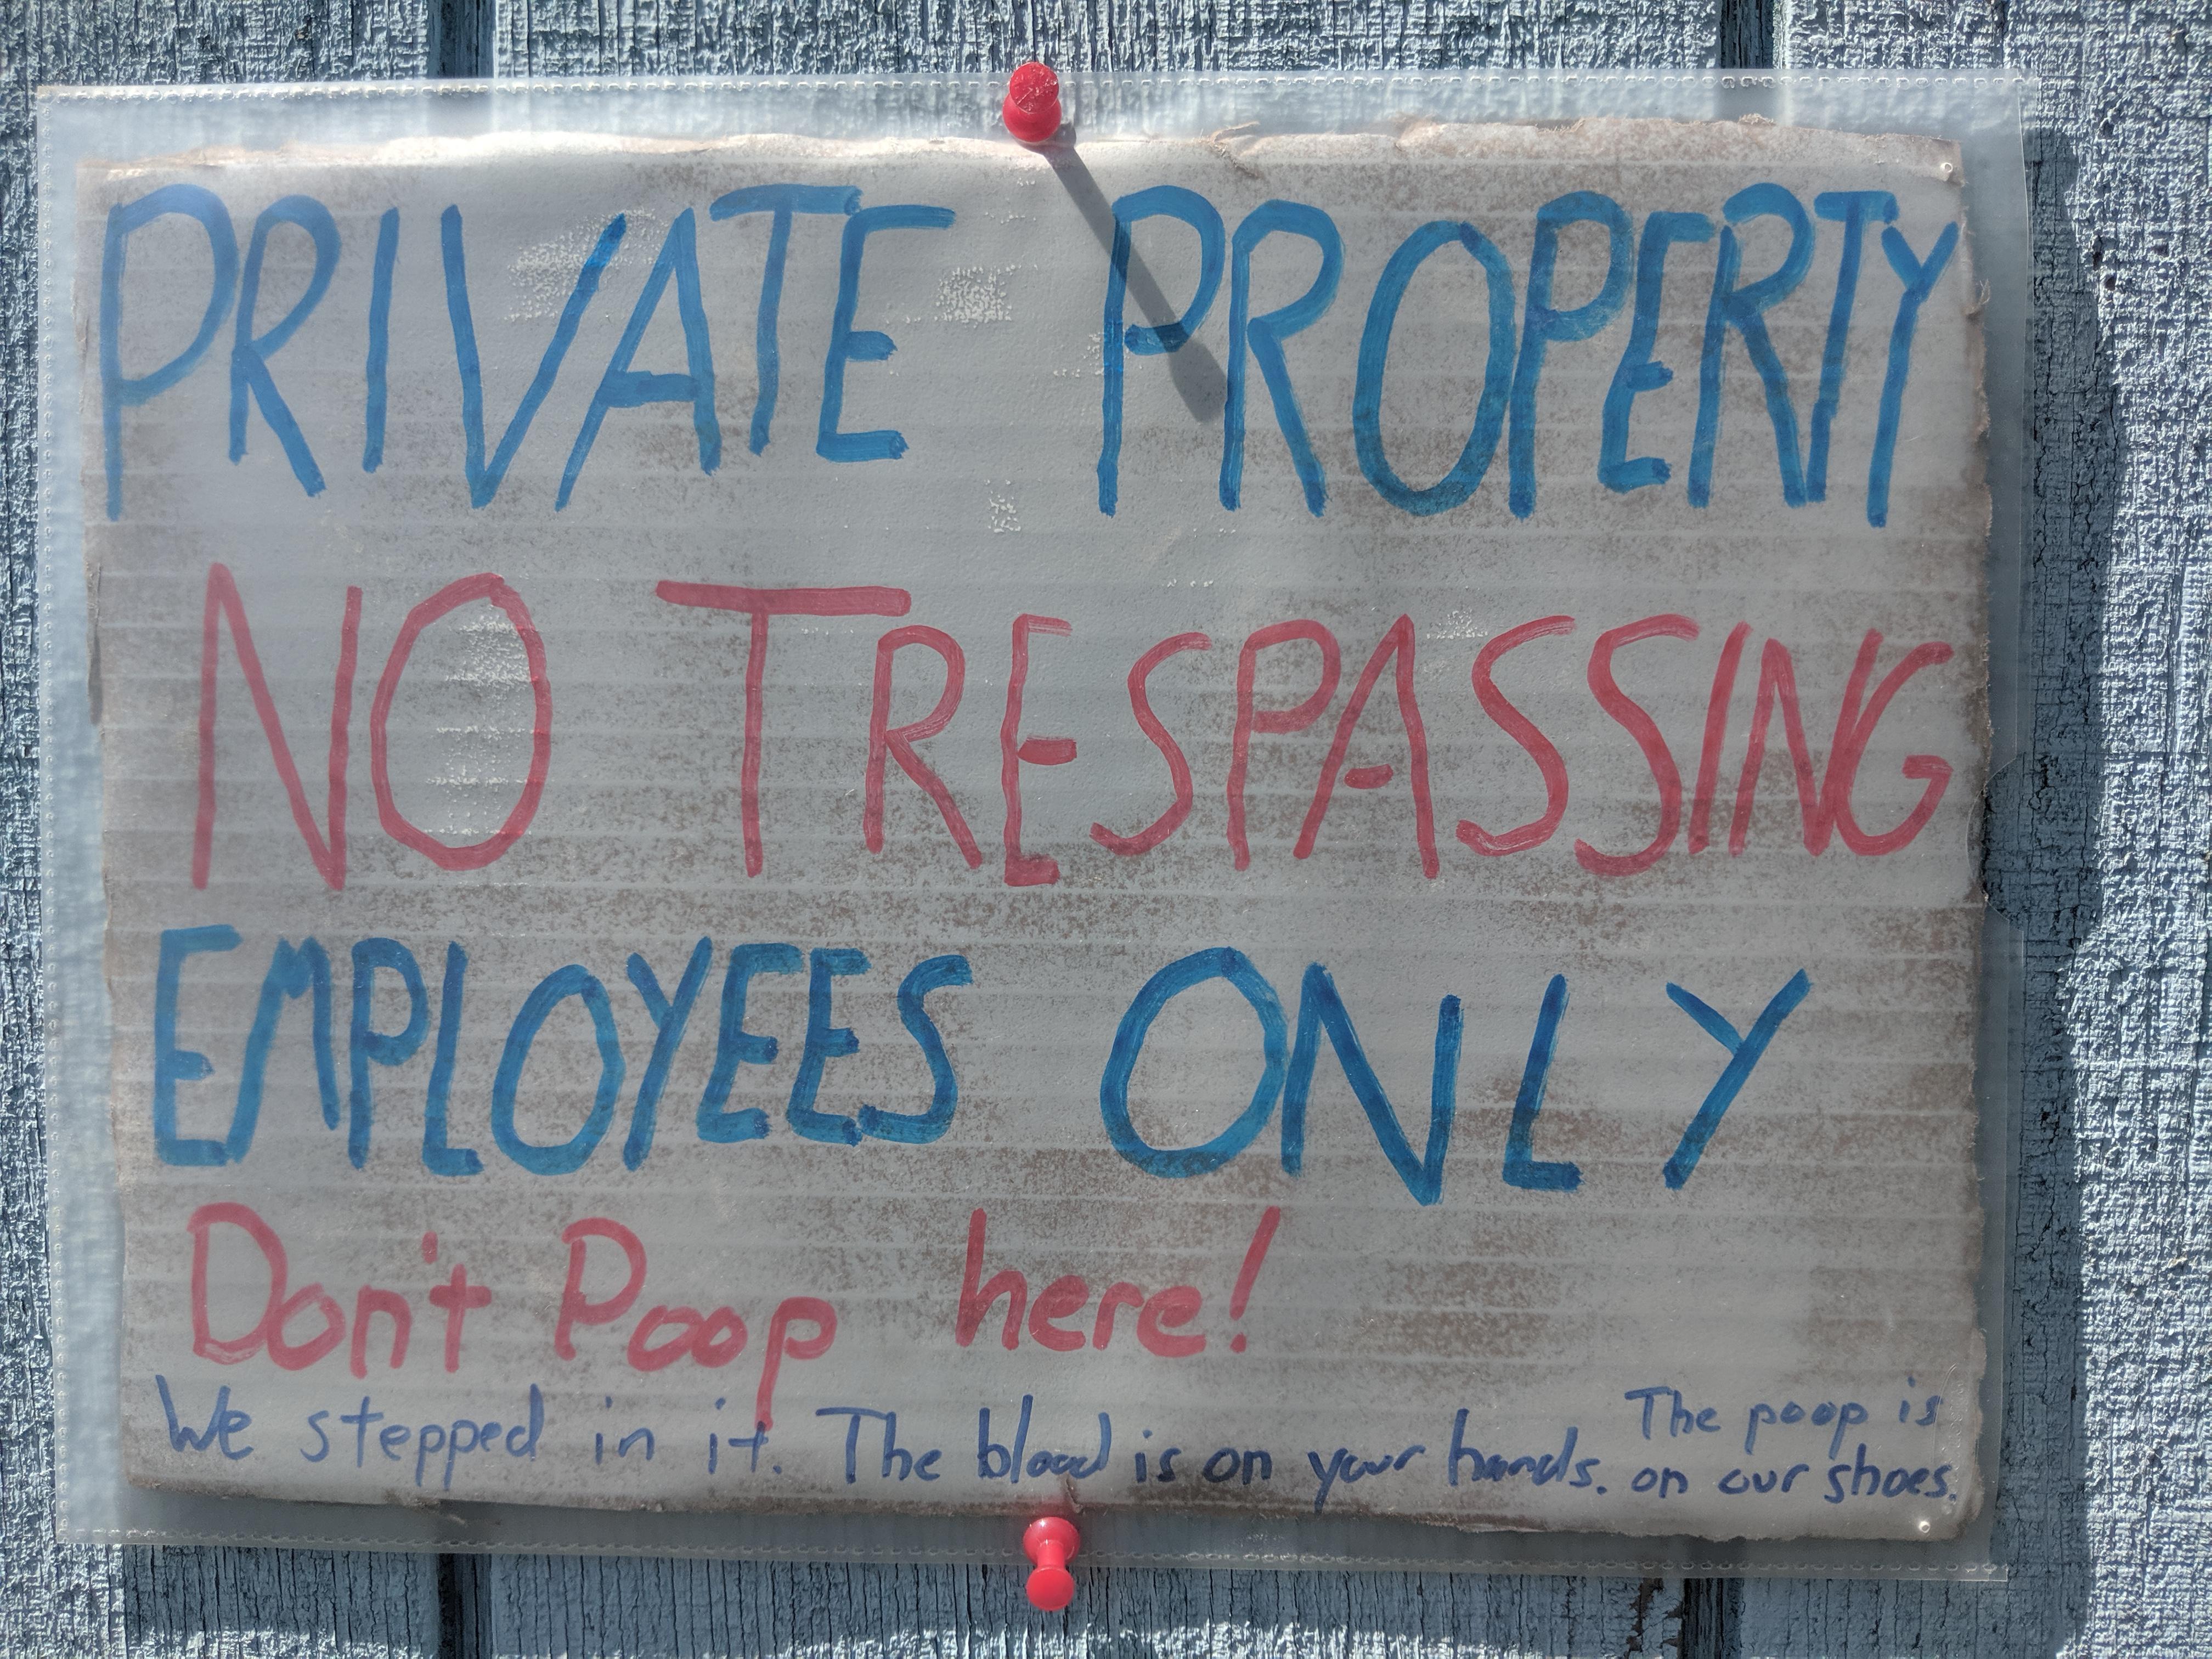 wall - To See Private Property No Trespassing Employees Only Pel Crpz etwas ter